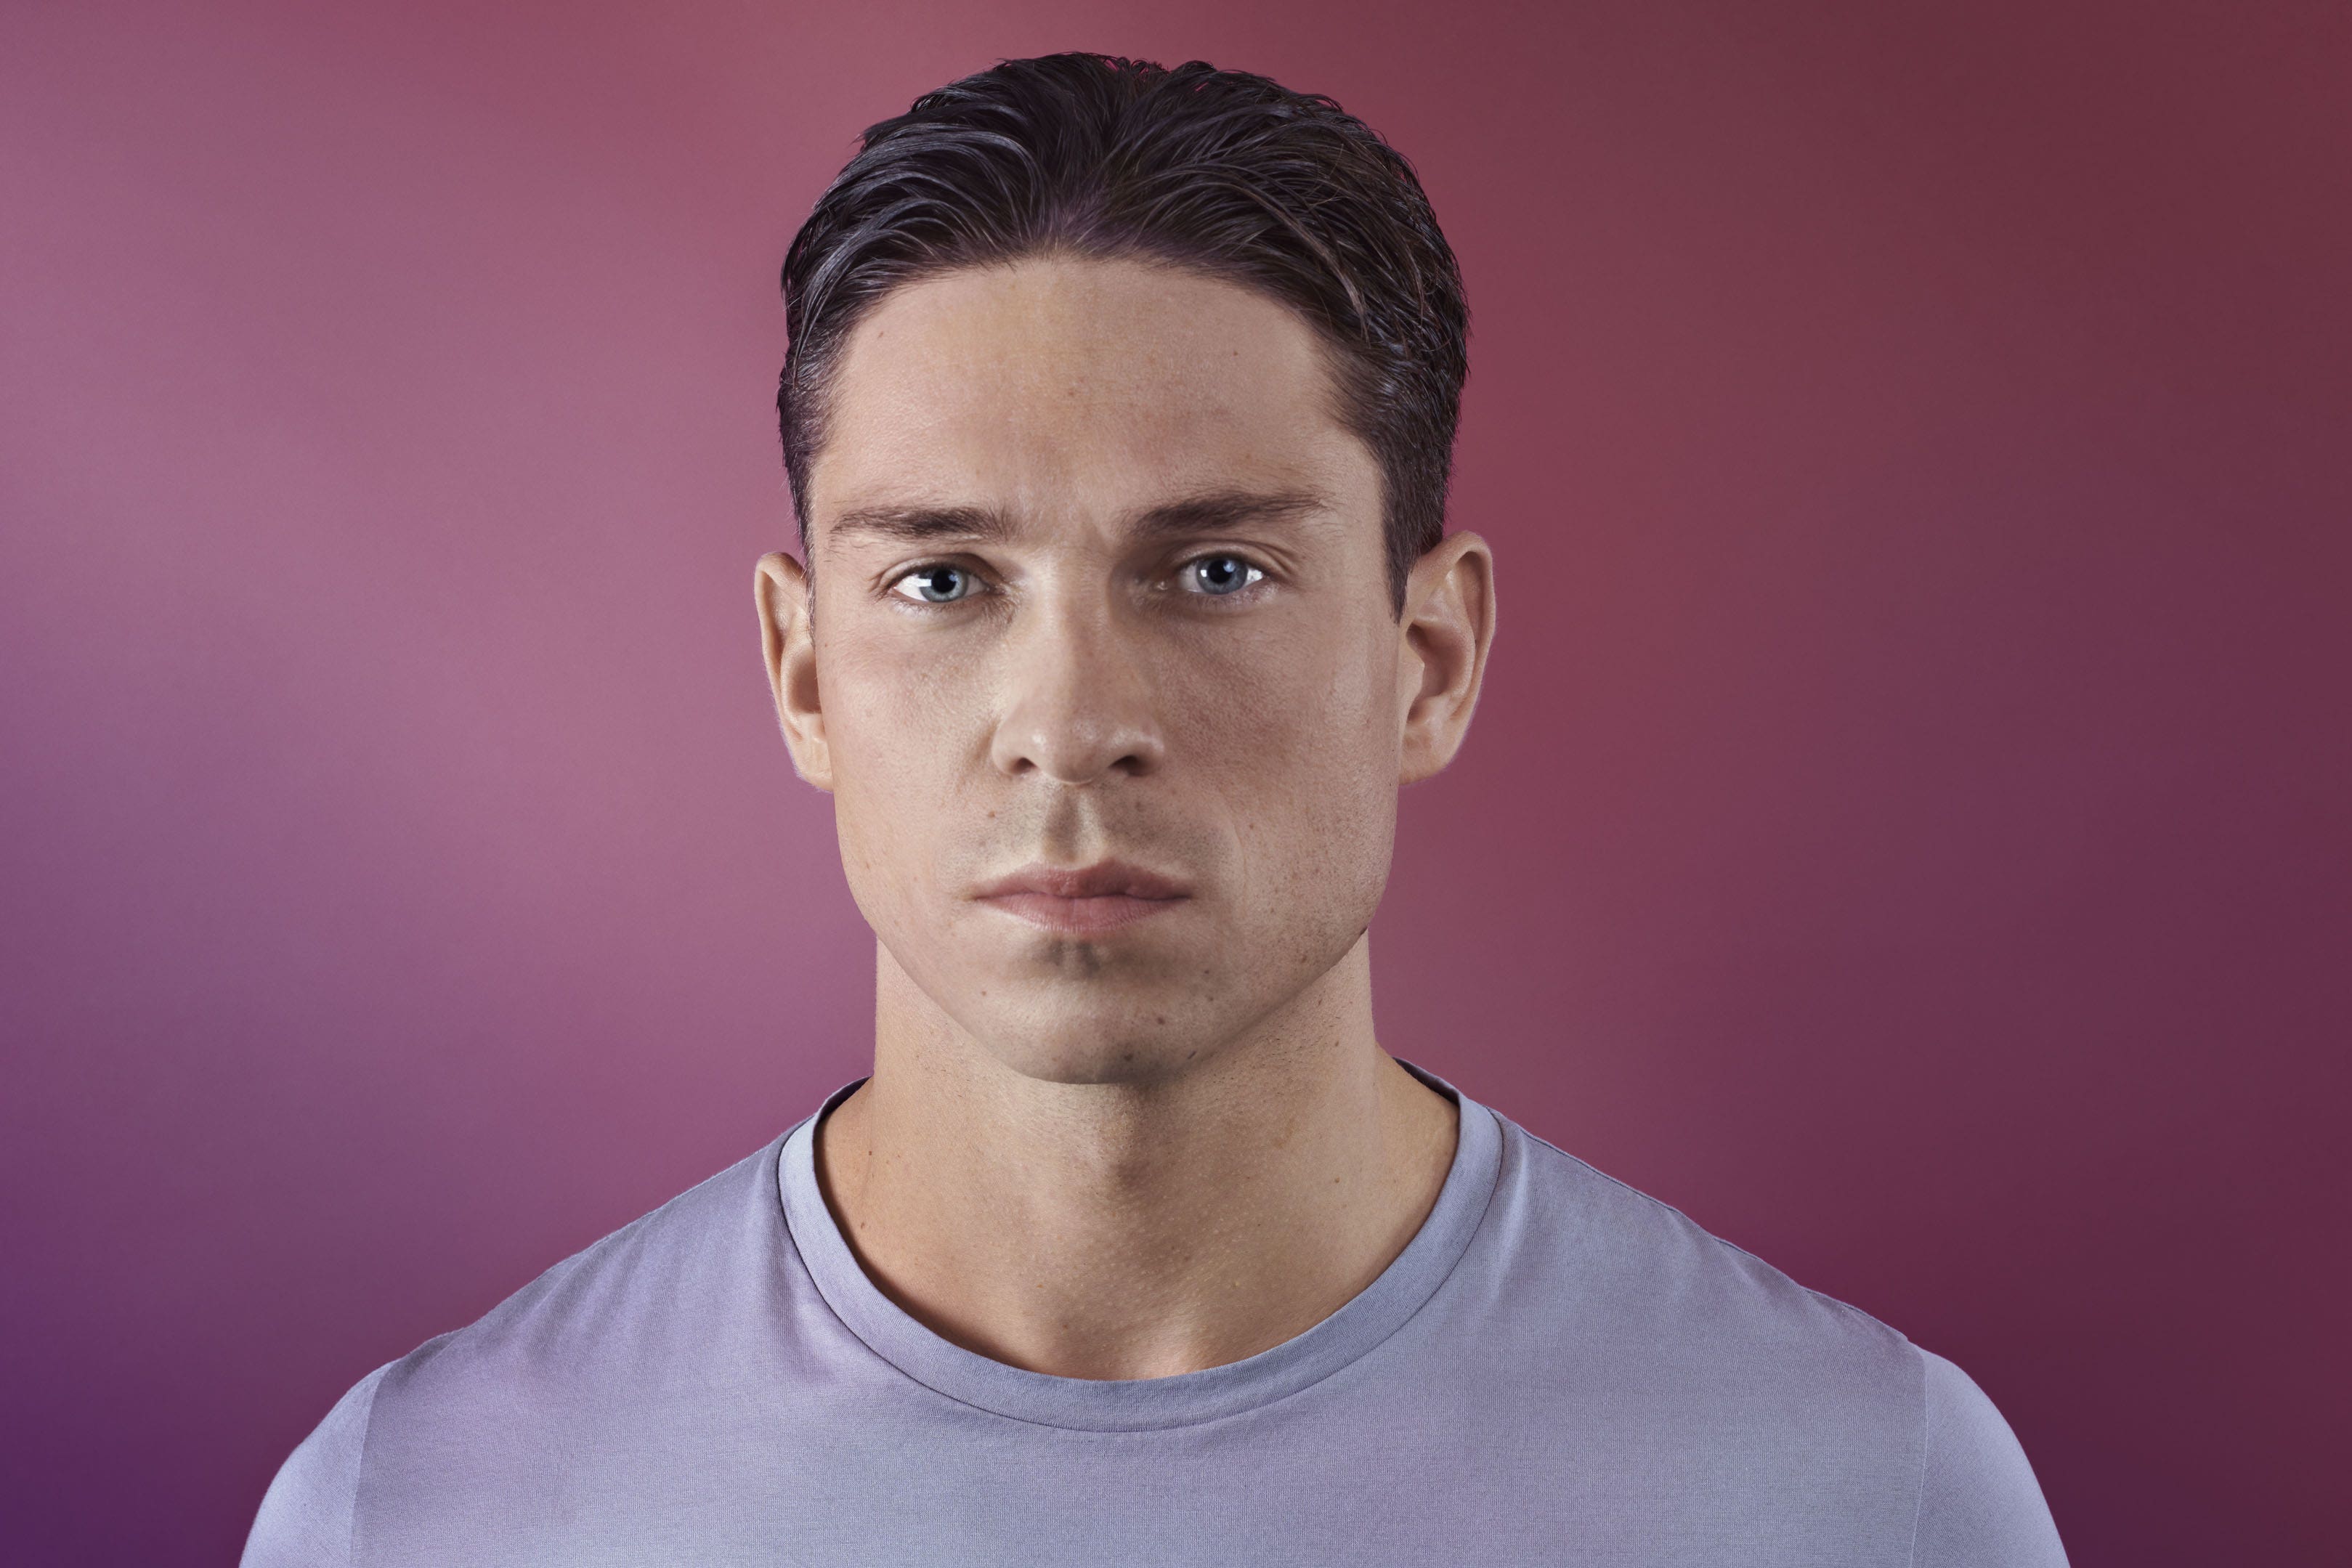 Joey Essex spoke about the death of his mother in a BBC documentary (Des Wilie/BBC/PA)